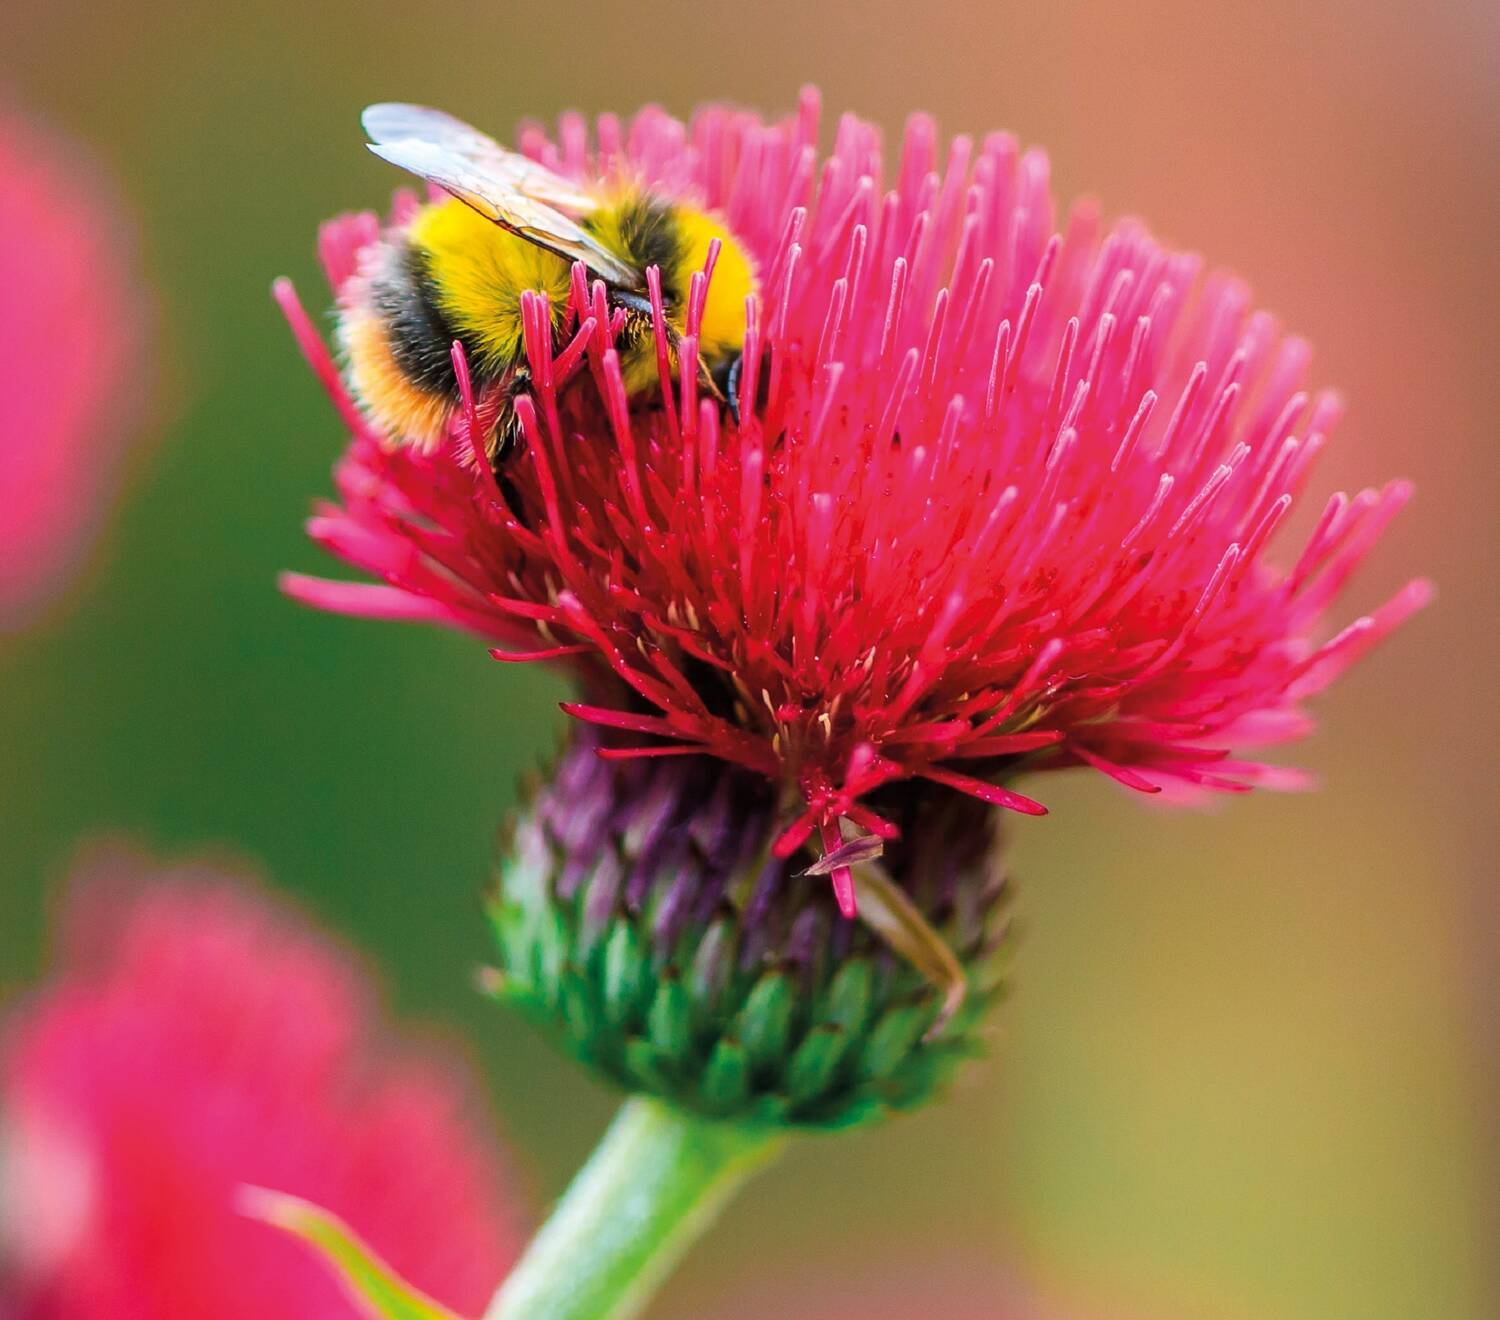 A furry-looking bumblebee sits in a bright pink thistle head, with a long green stem.